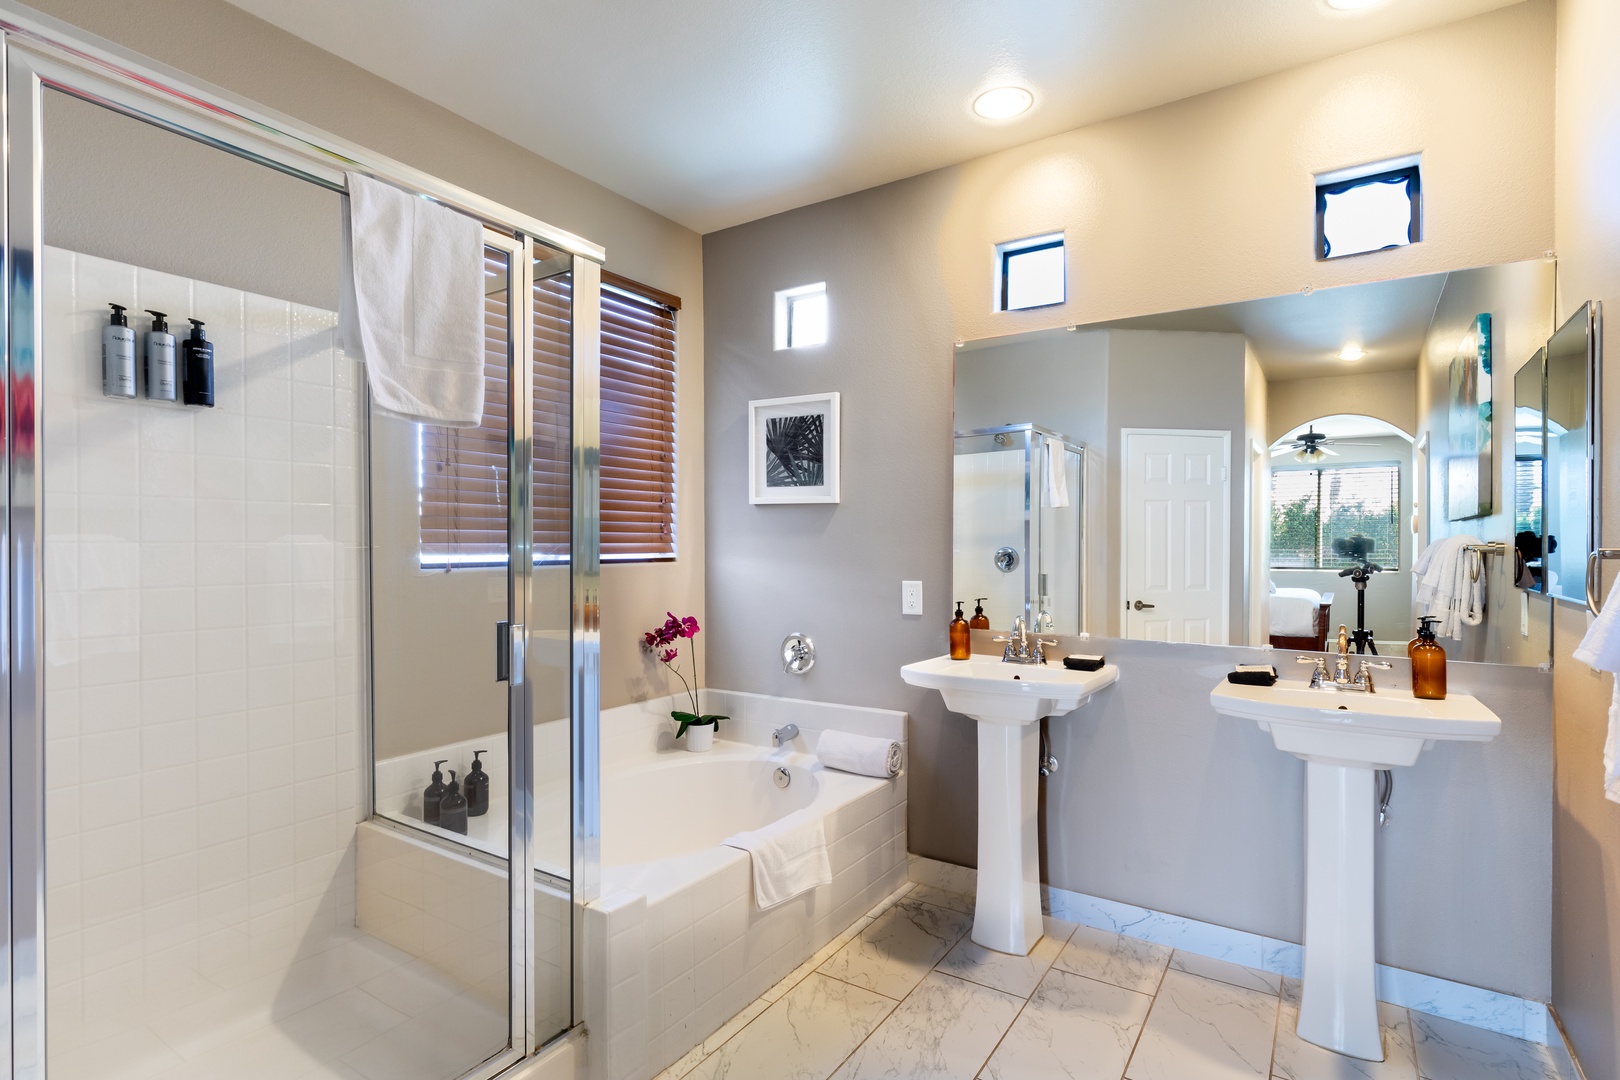 Private en-suite with stand dual sinks, up shower, and separate tub